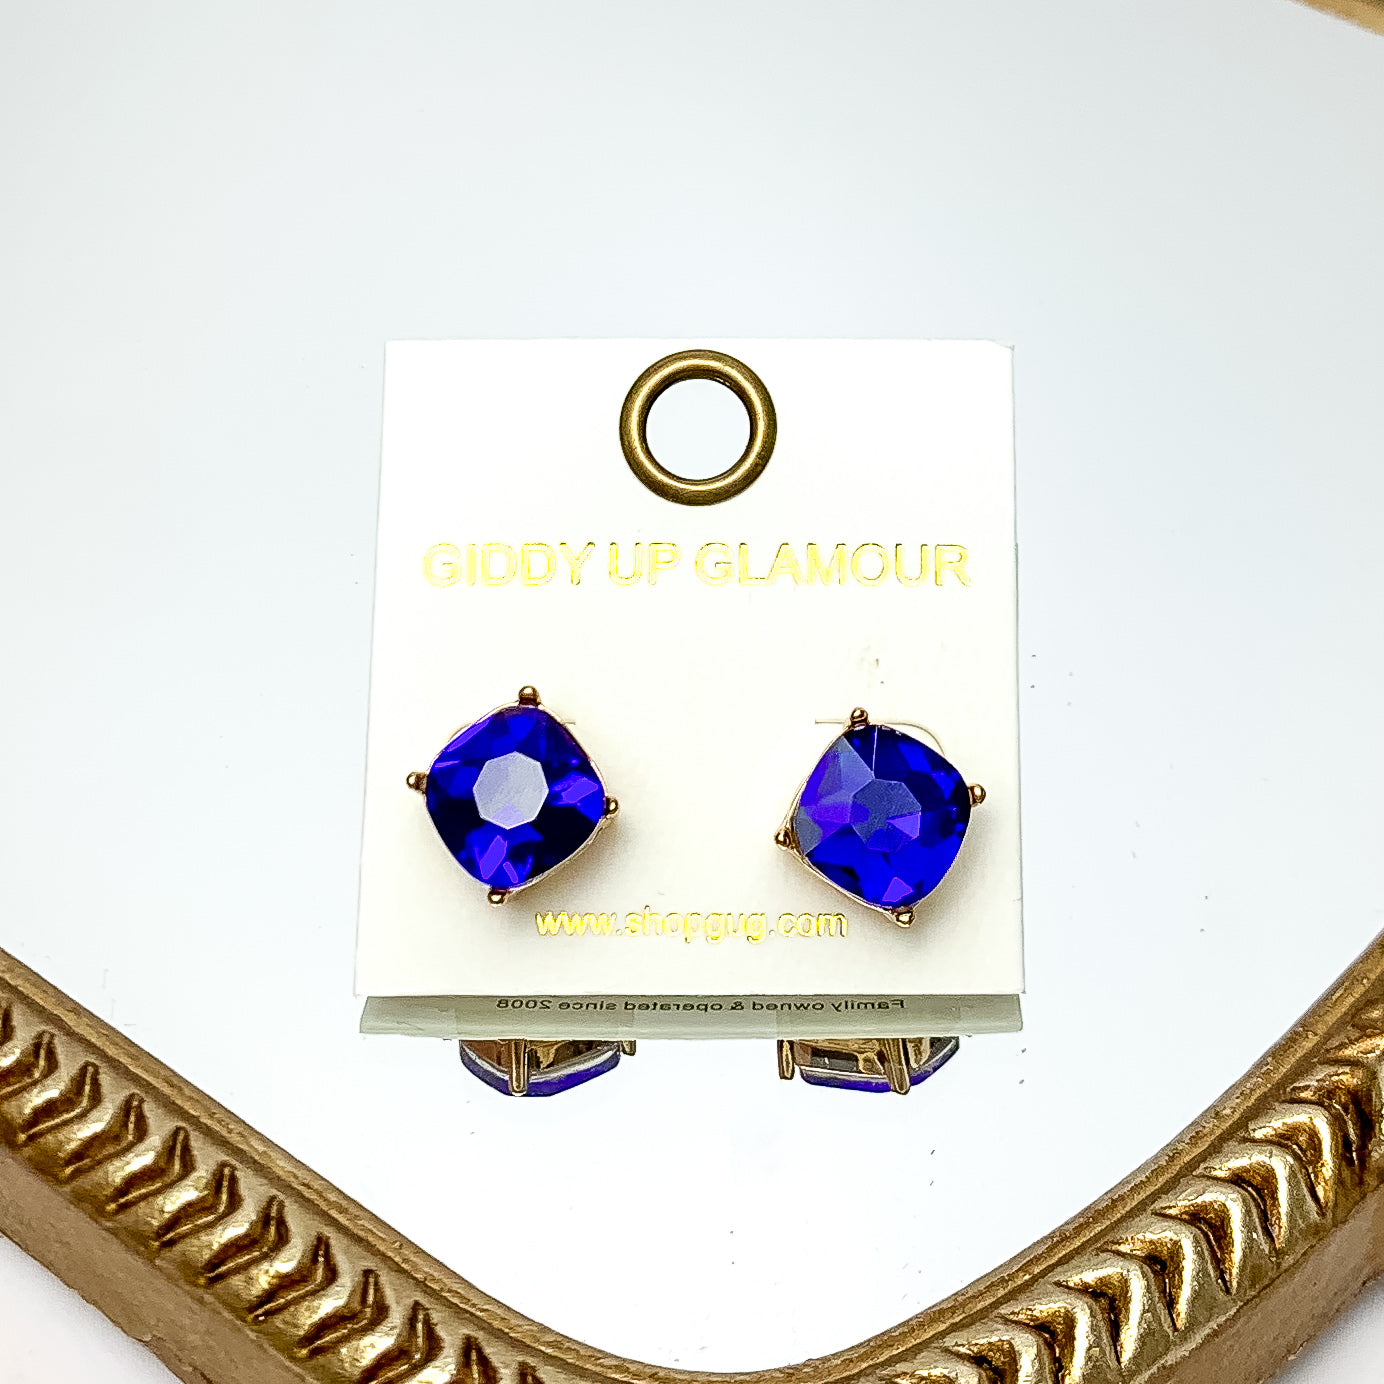 Large Crystal Stud Earrings in Royal Blue. These earrings are pictured laying on a gold trimmed mirror.